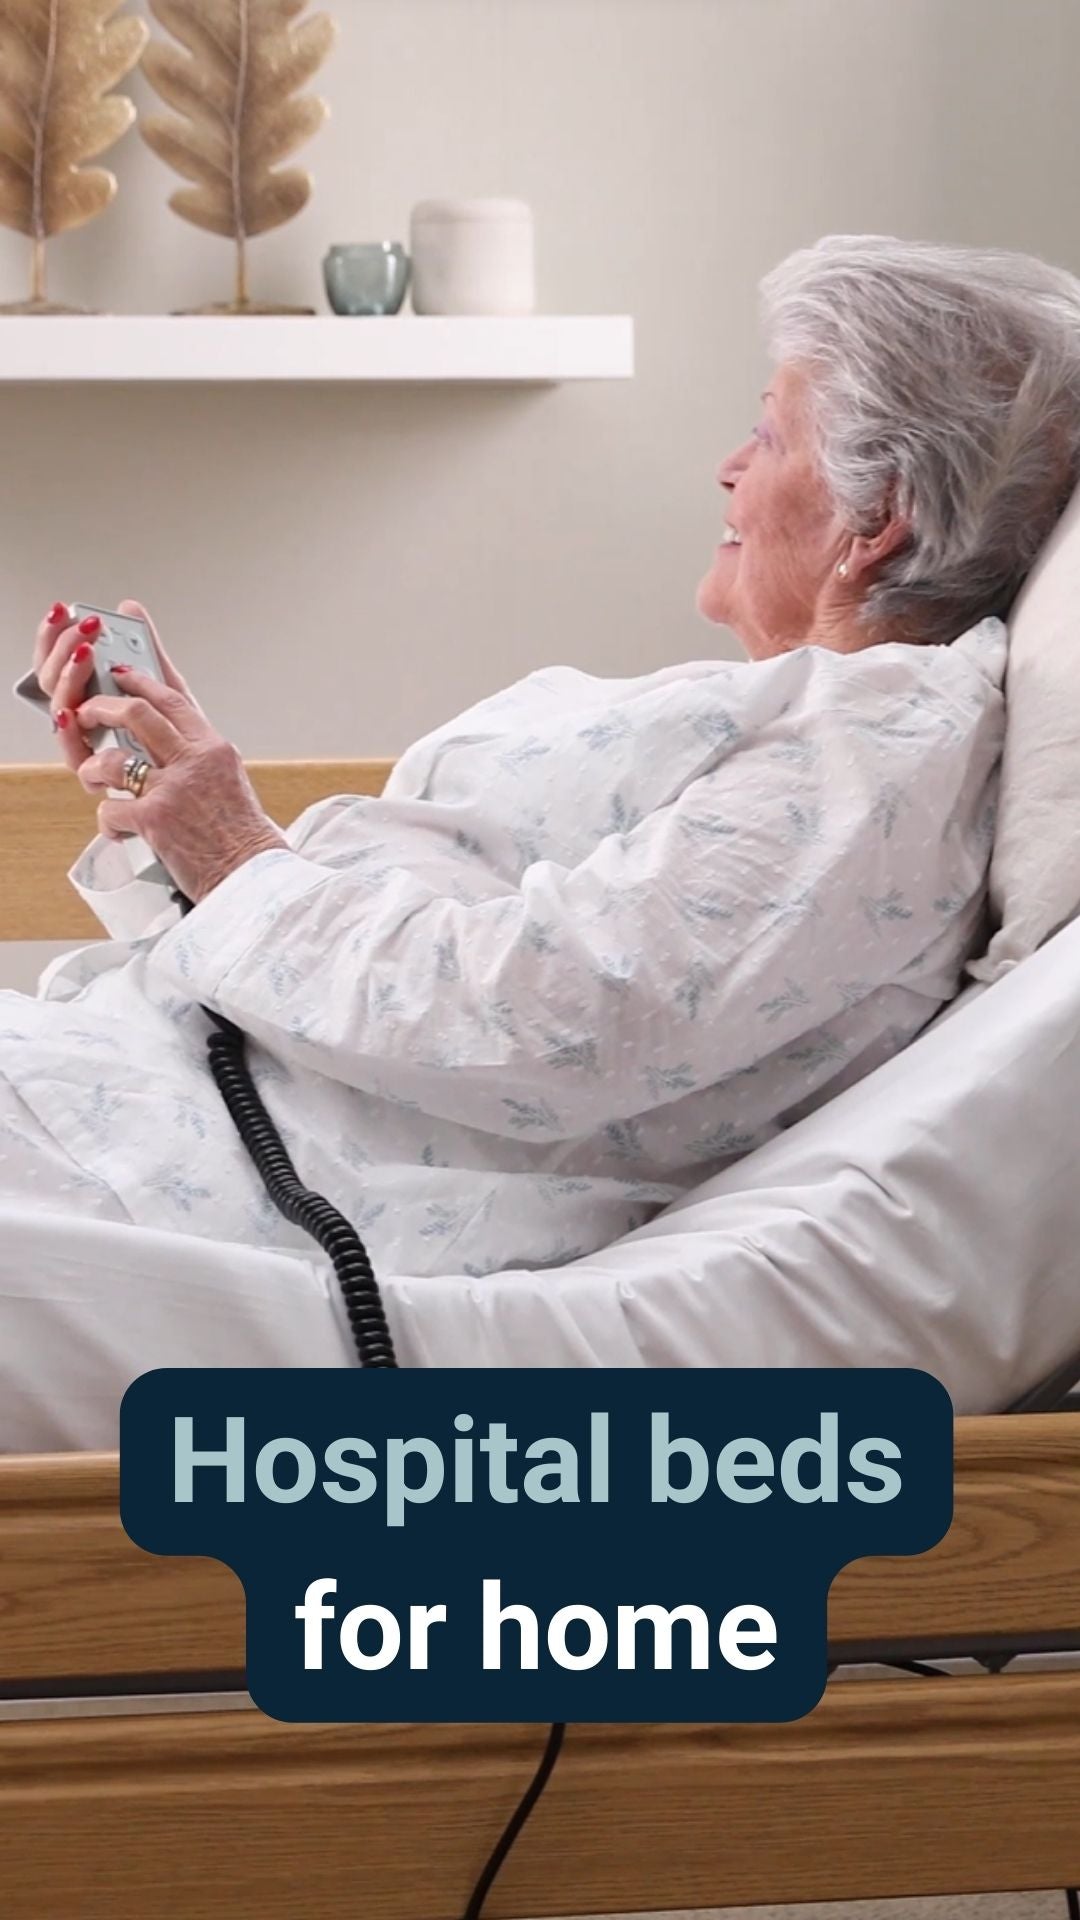 A lady sat smiling holding a remote in a profiling bed with the caption 'Hospital beds for home'